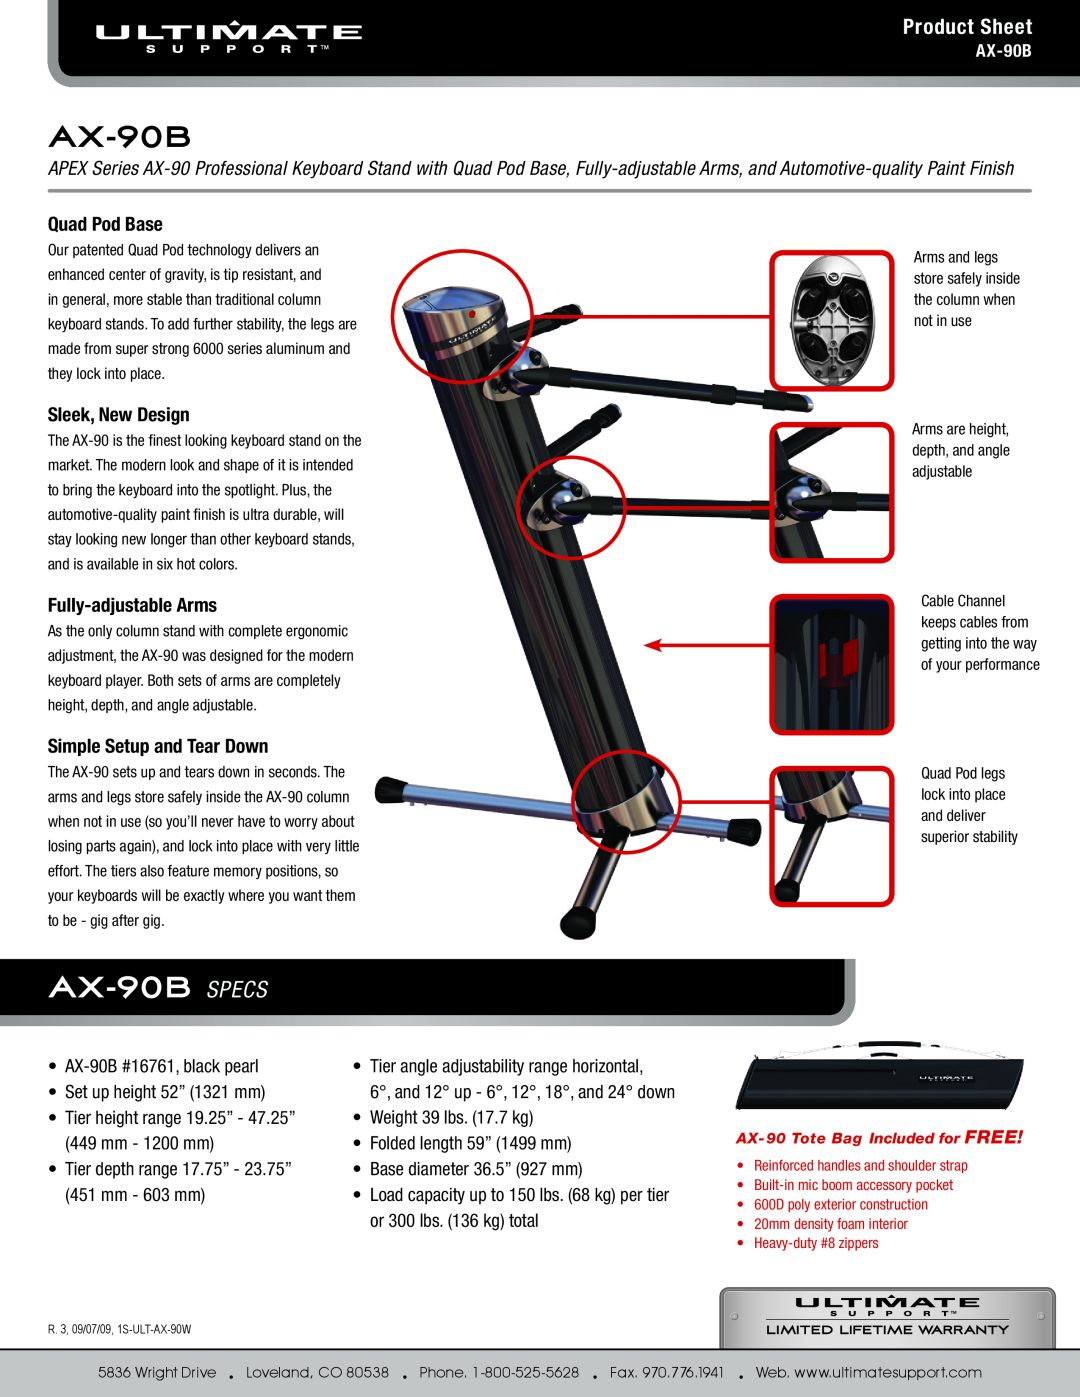 Ultimate Support Systems manual Product Sheet, AX-90B SPECS, Quad Pod Base, Sleek, New Design, Fully-adjustable Arms 